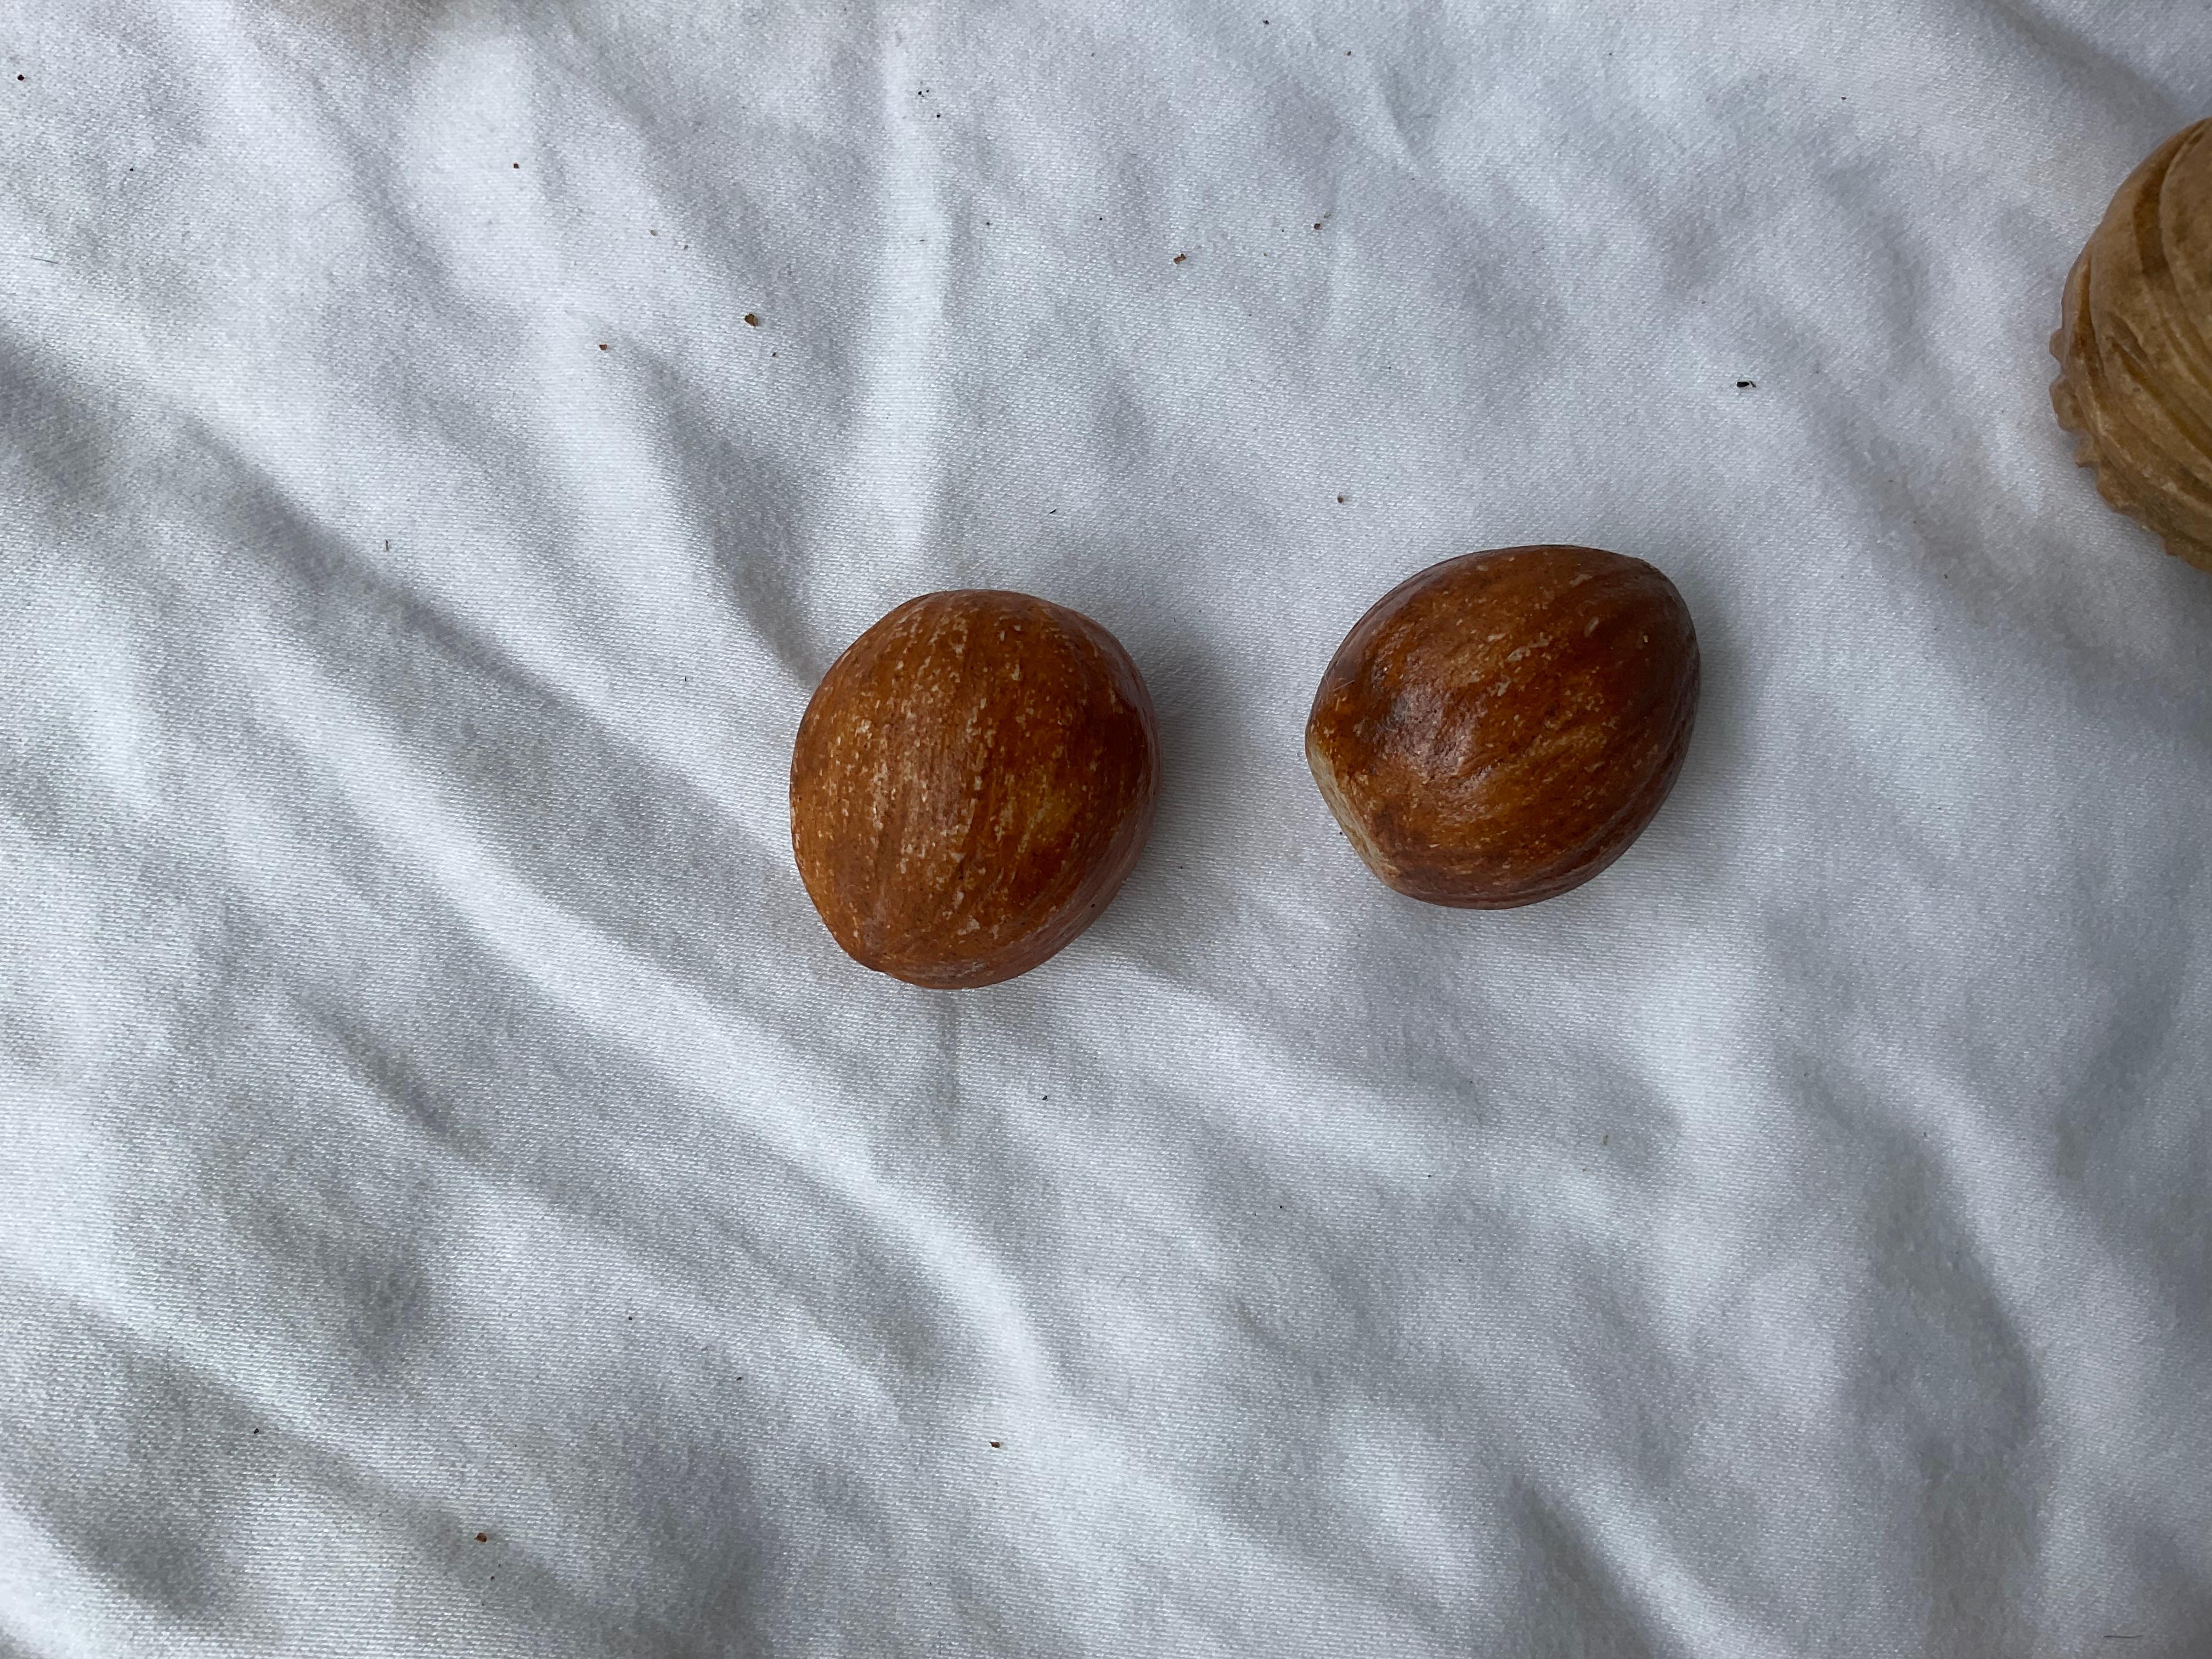 This listing is for 13 Italian stone nuts. There are 2 almonds, 2 hazelnuts, and the rest walnuts. The pieces have been bought at different times, in different places. There is a difference in appearance, in some of the walnuts. They were